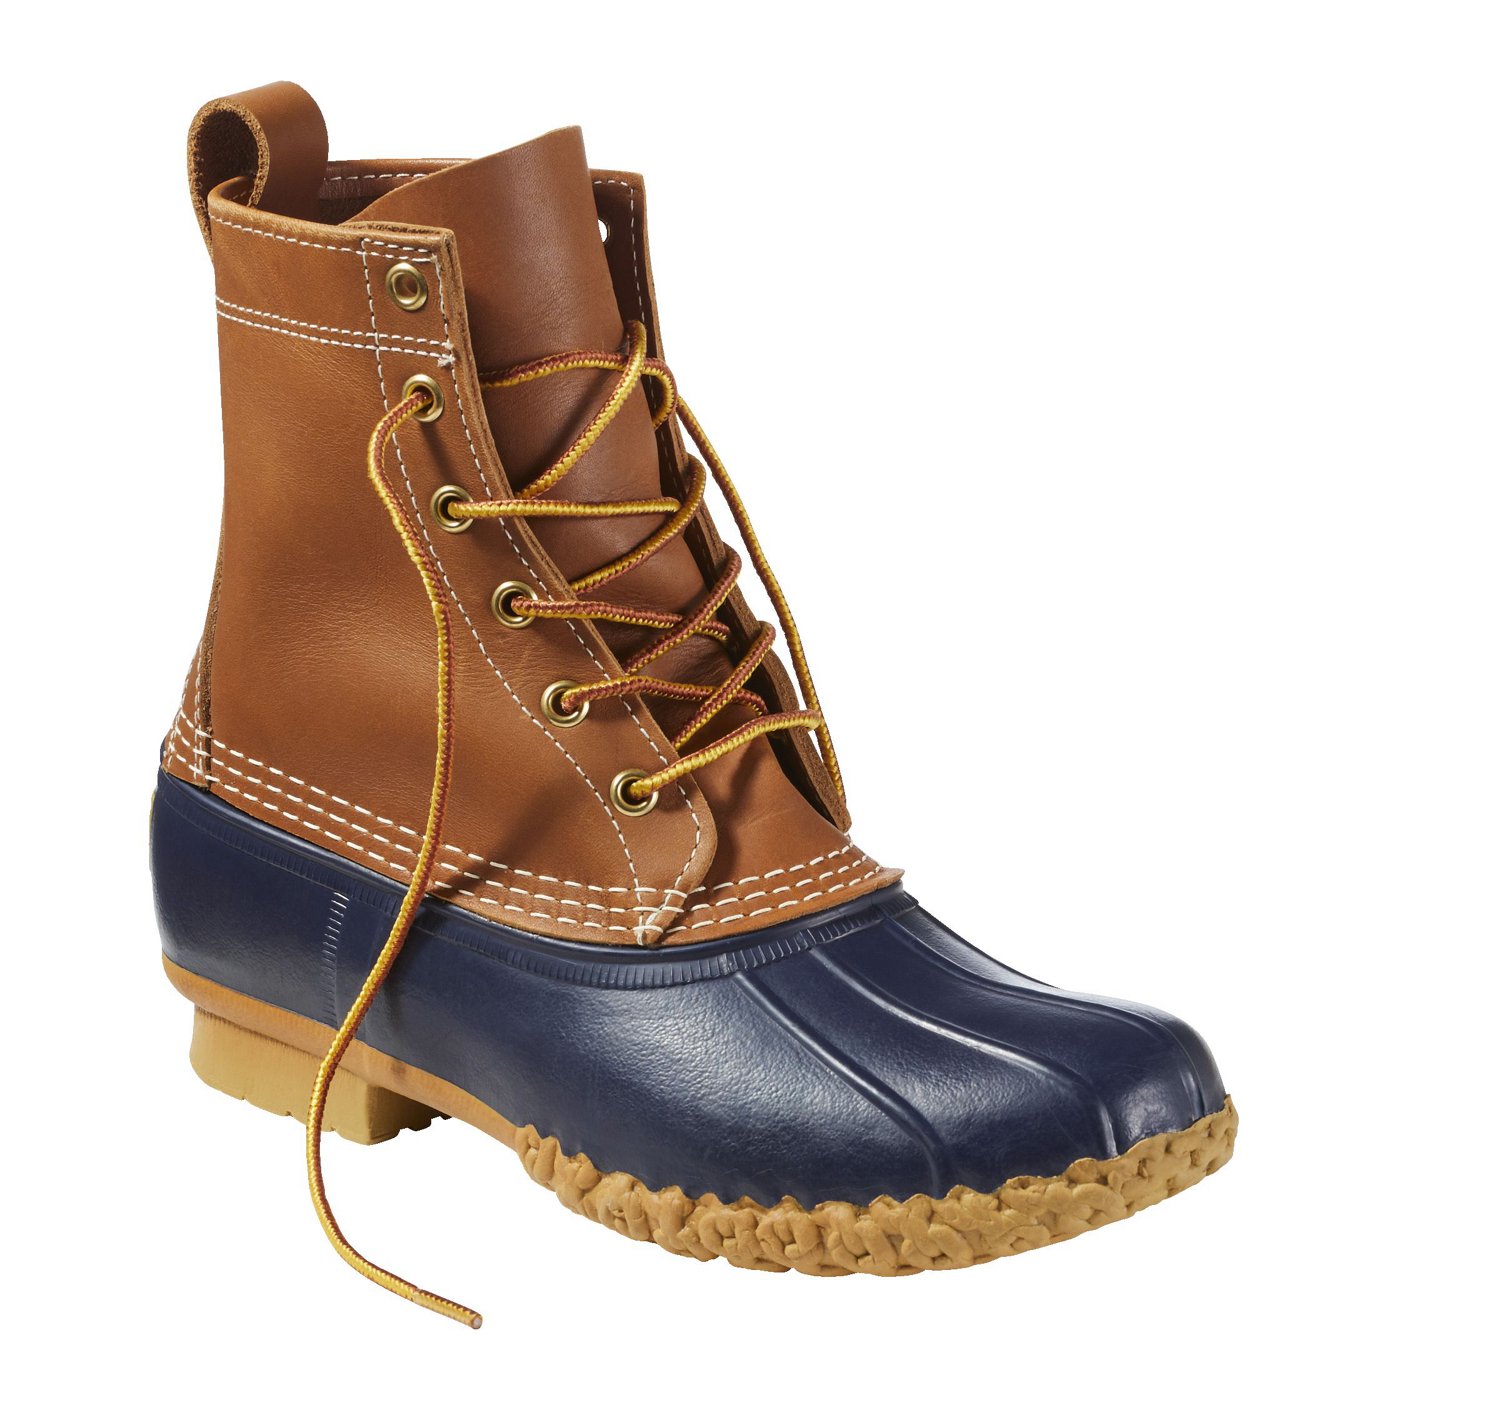 L.L. Bean Women's New Bean 8 in Boots | Free Shipping at Academy